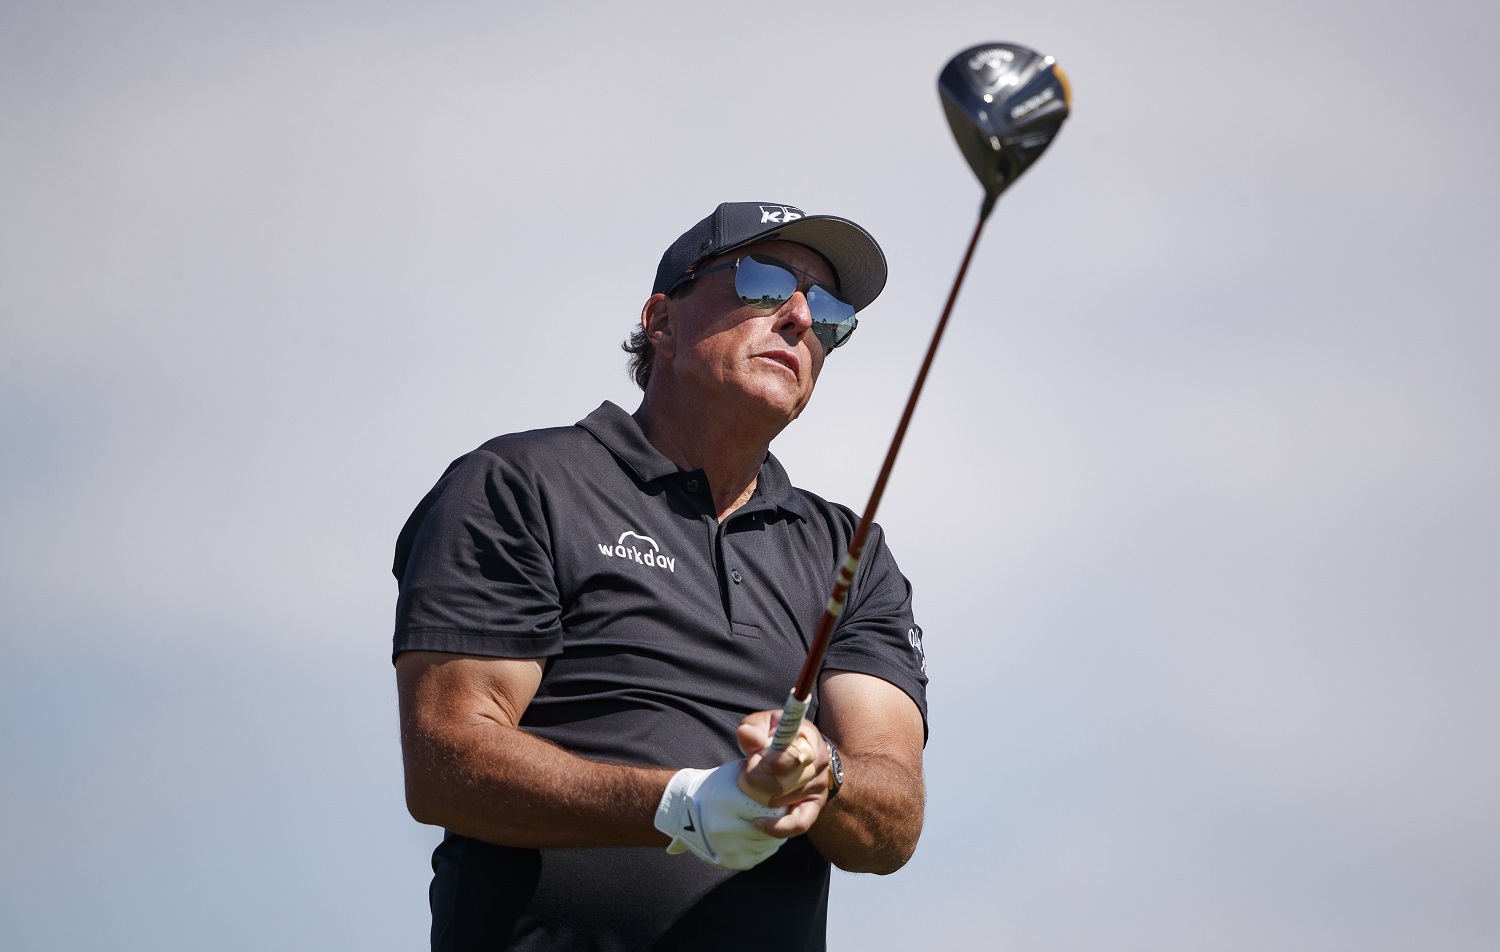 Phil Mickelson Has Lost His Spot in a Valuable Franchise